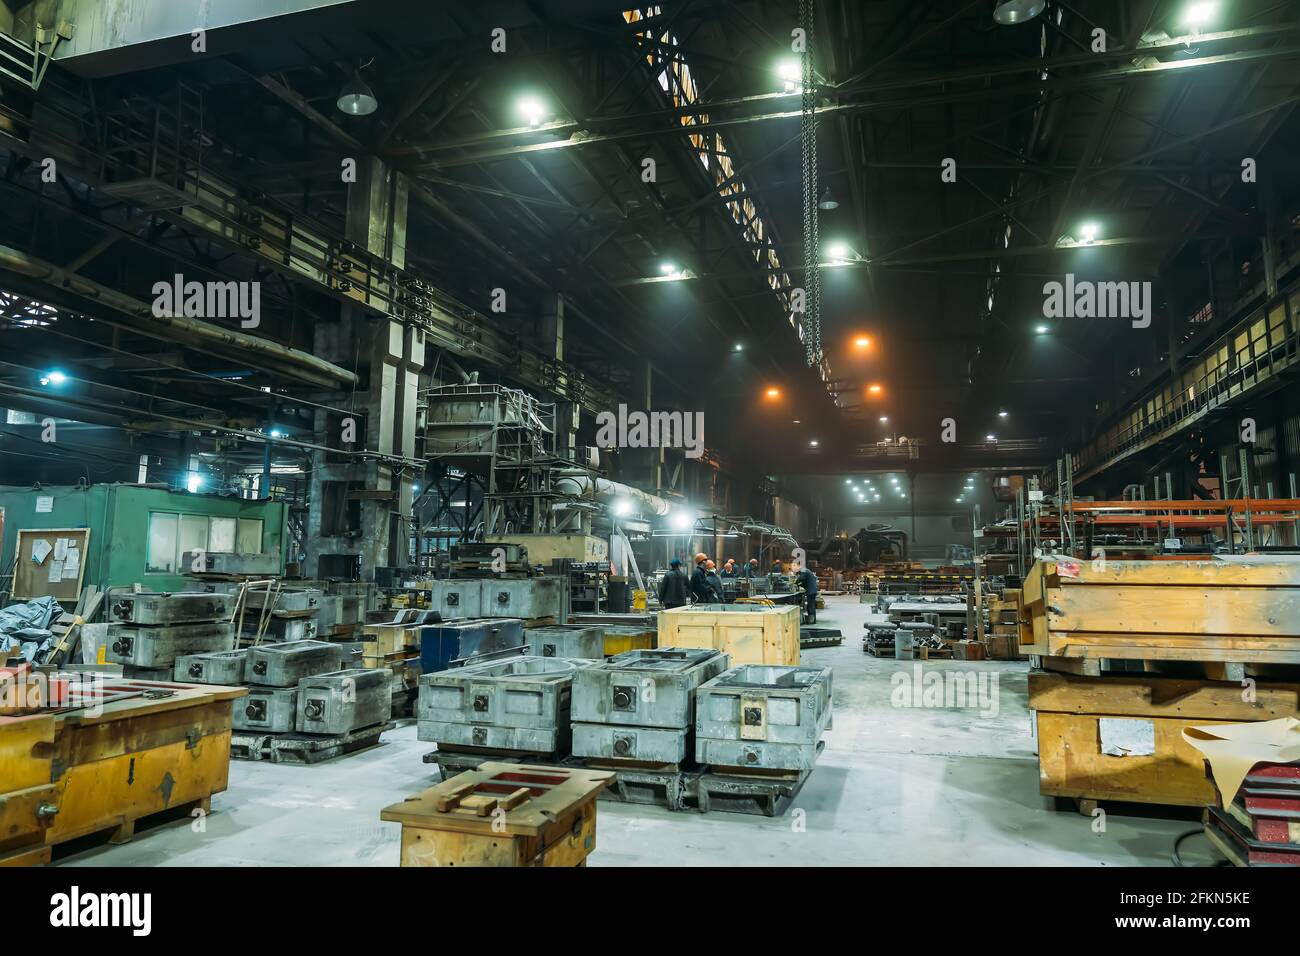 Steel Factory with workers in process of work, industrial interior, large hangar with iron production. Stock Photo